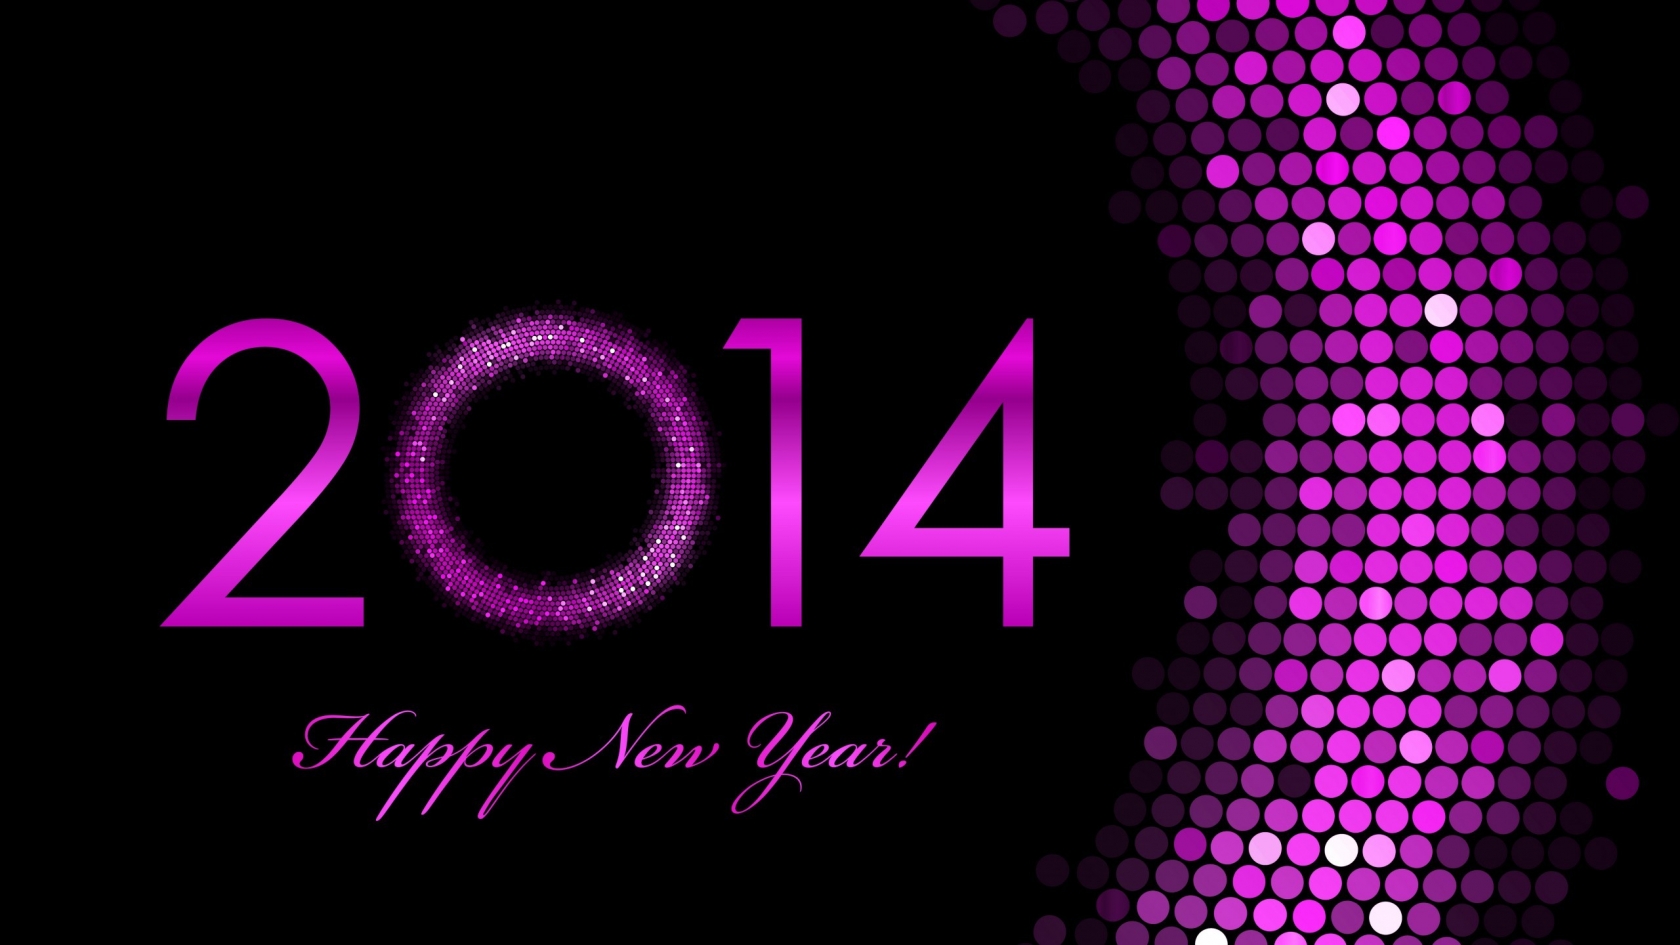 2014 Happy New Year for 1680 x 945 HDTV resolution